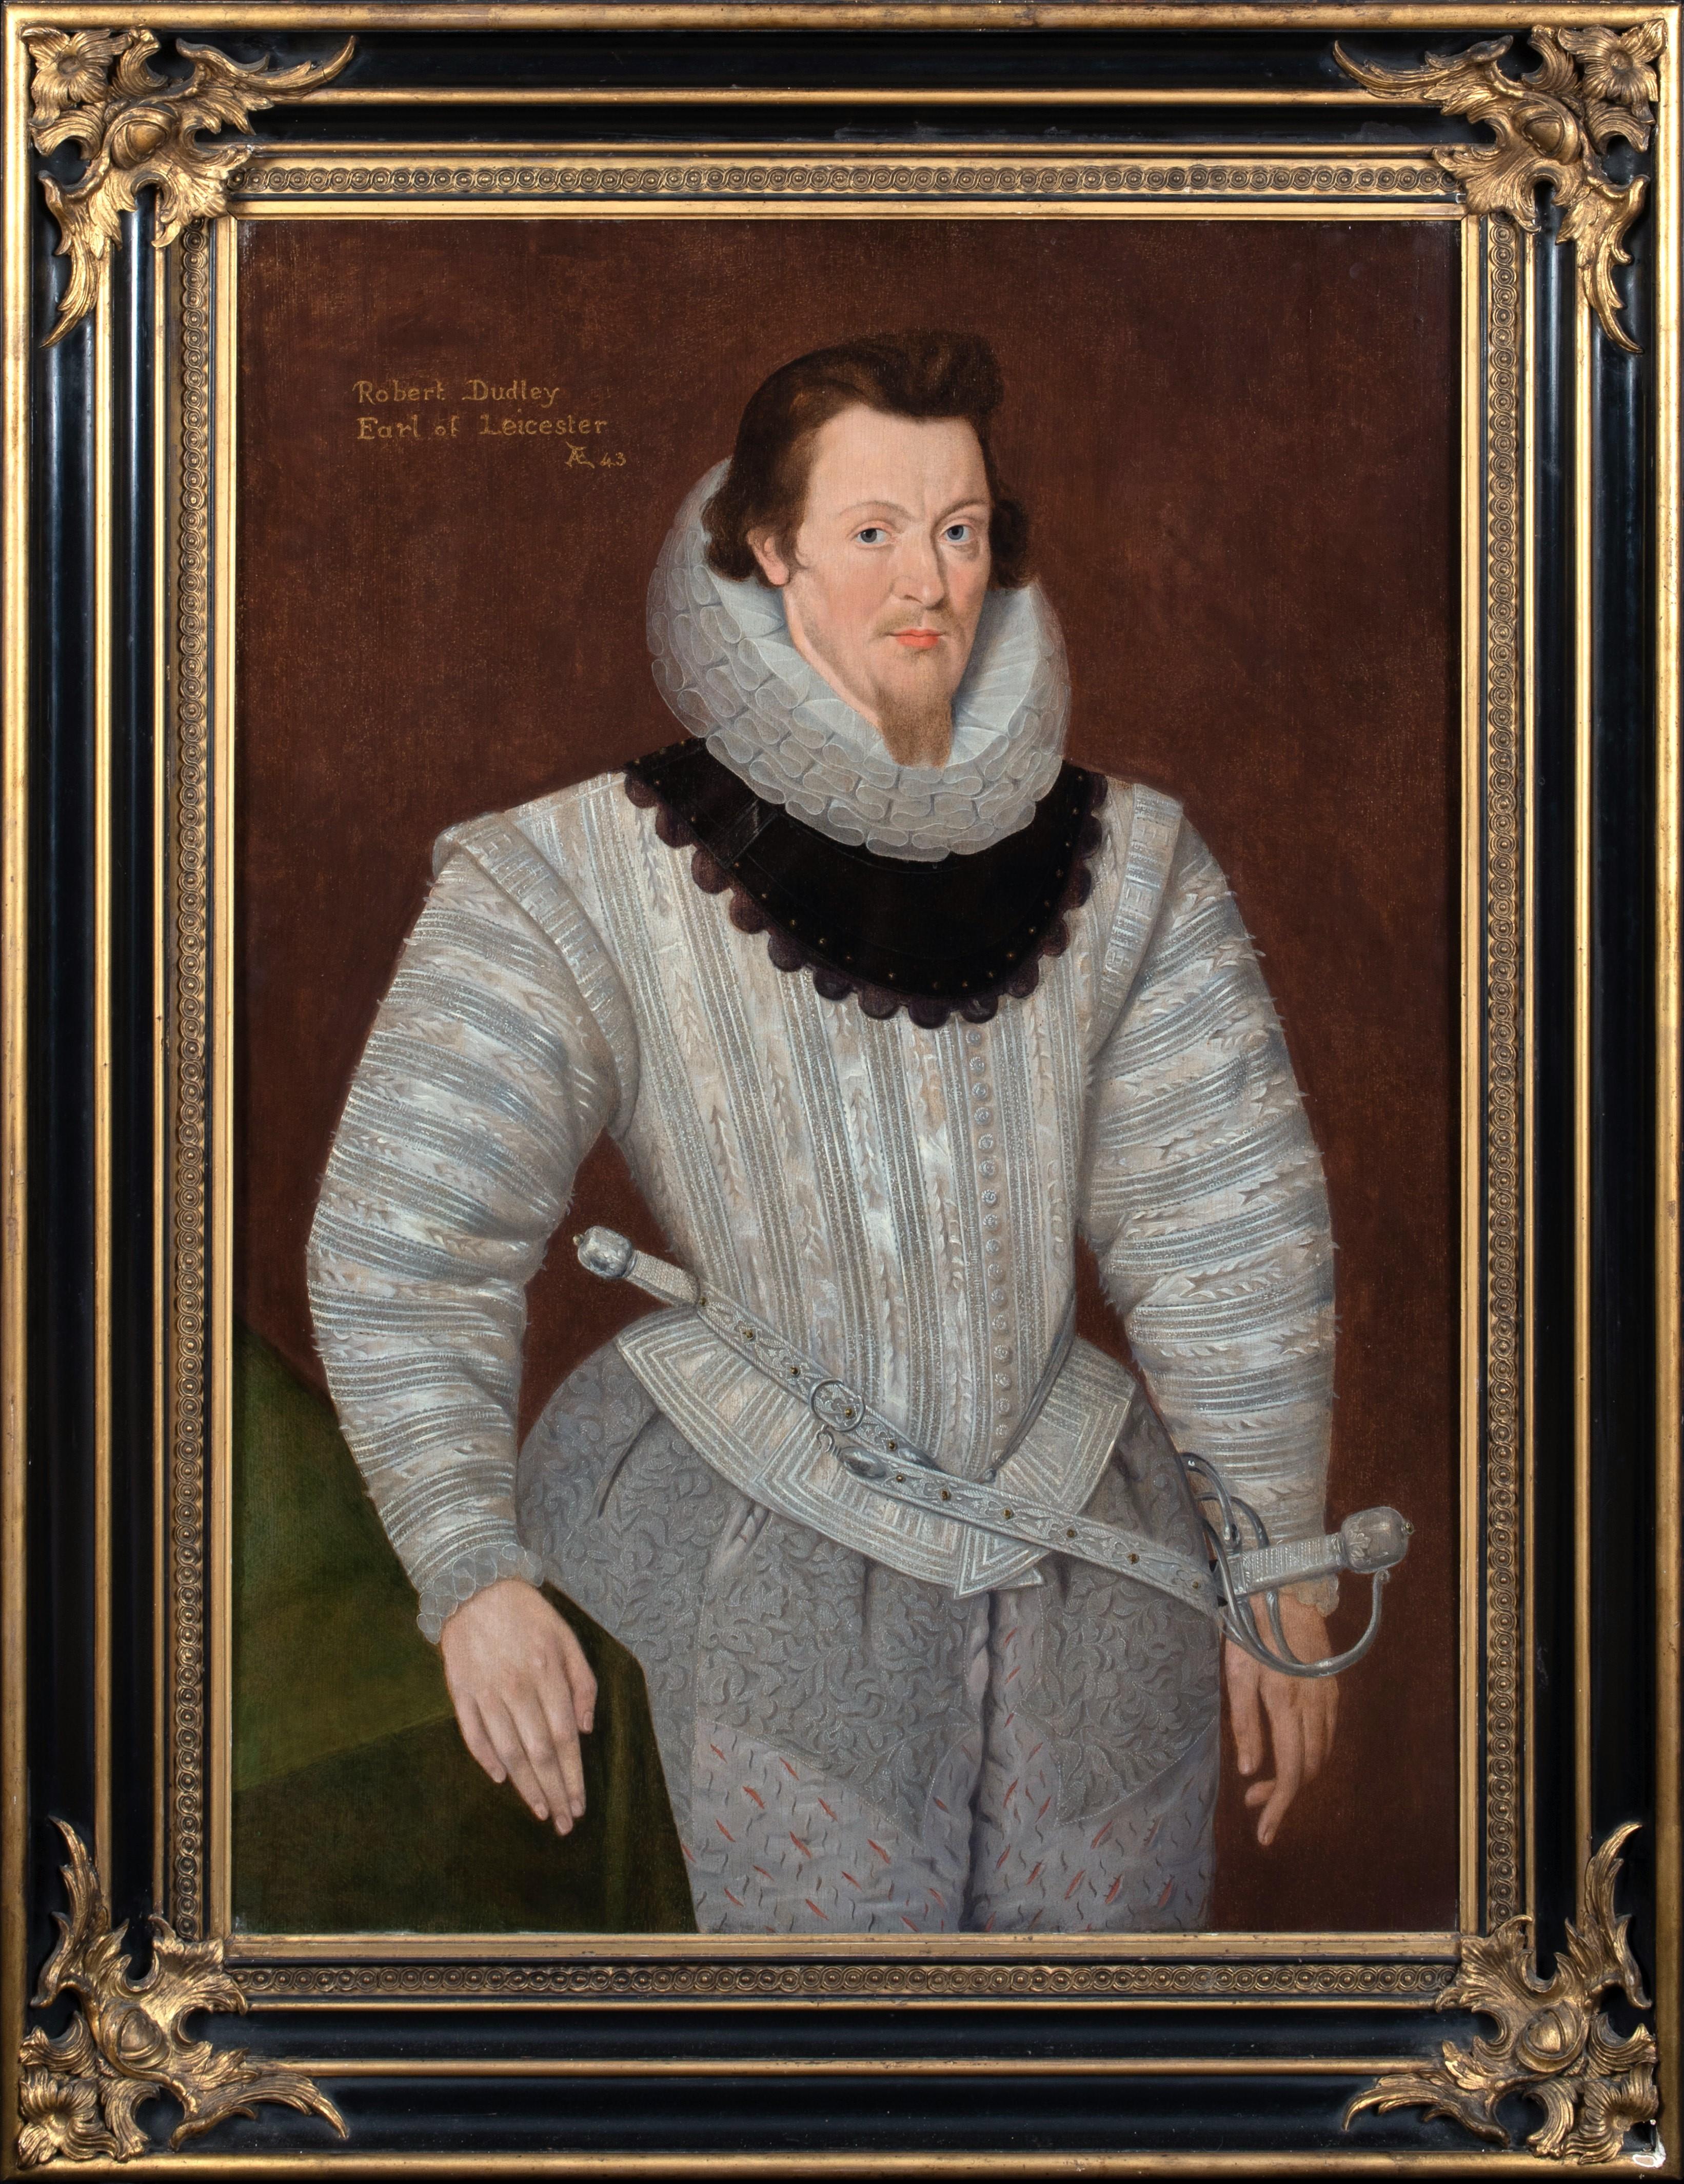 George Gower Portrait Painting - Portrait Identified As Robert Dudley, 1st Earl of Leicester